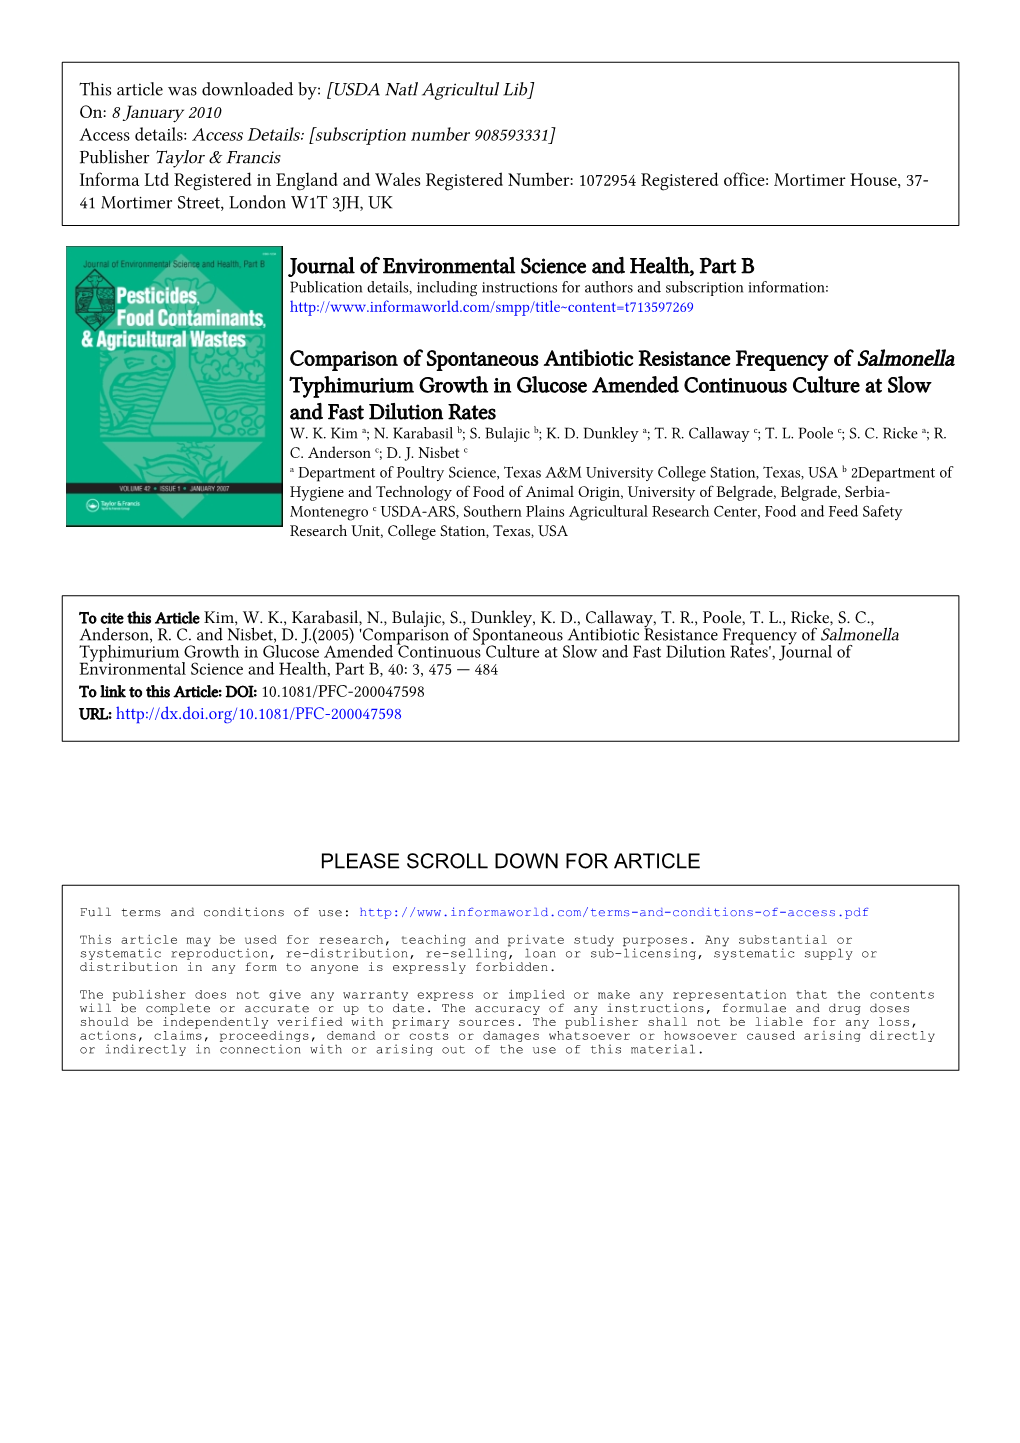 Journal of Environmental Science and Health, Part B Comparison of Spontaneous Antibiotic Resistance Frequency of Salmonella Typh